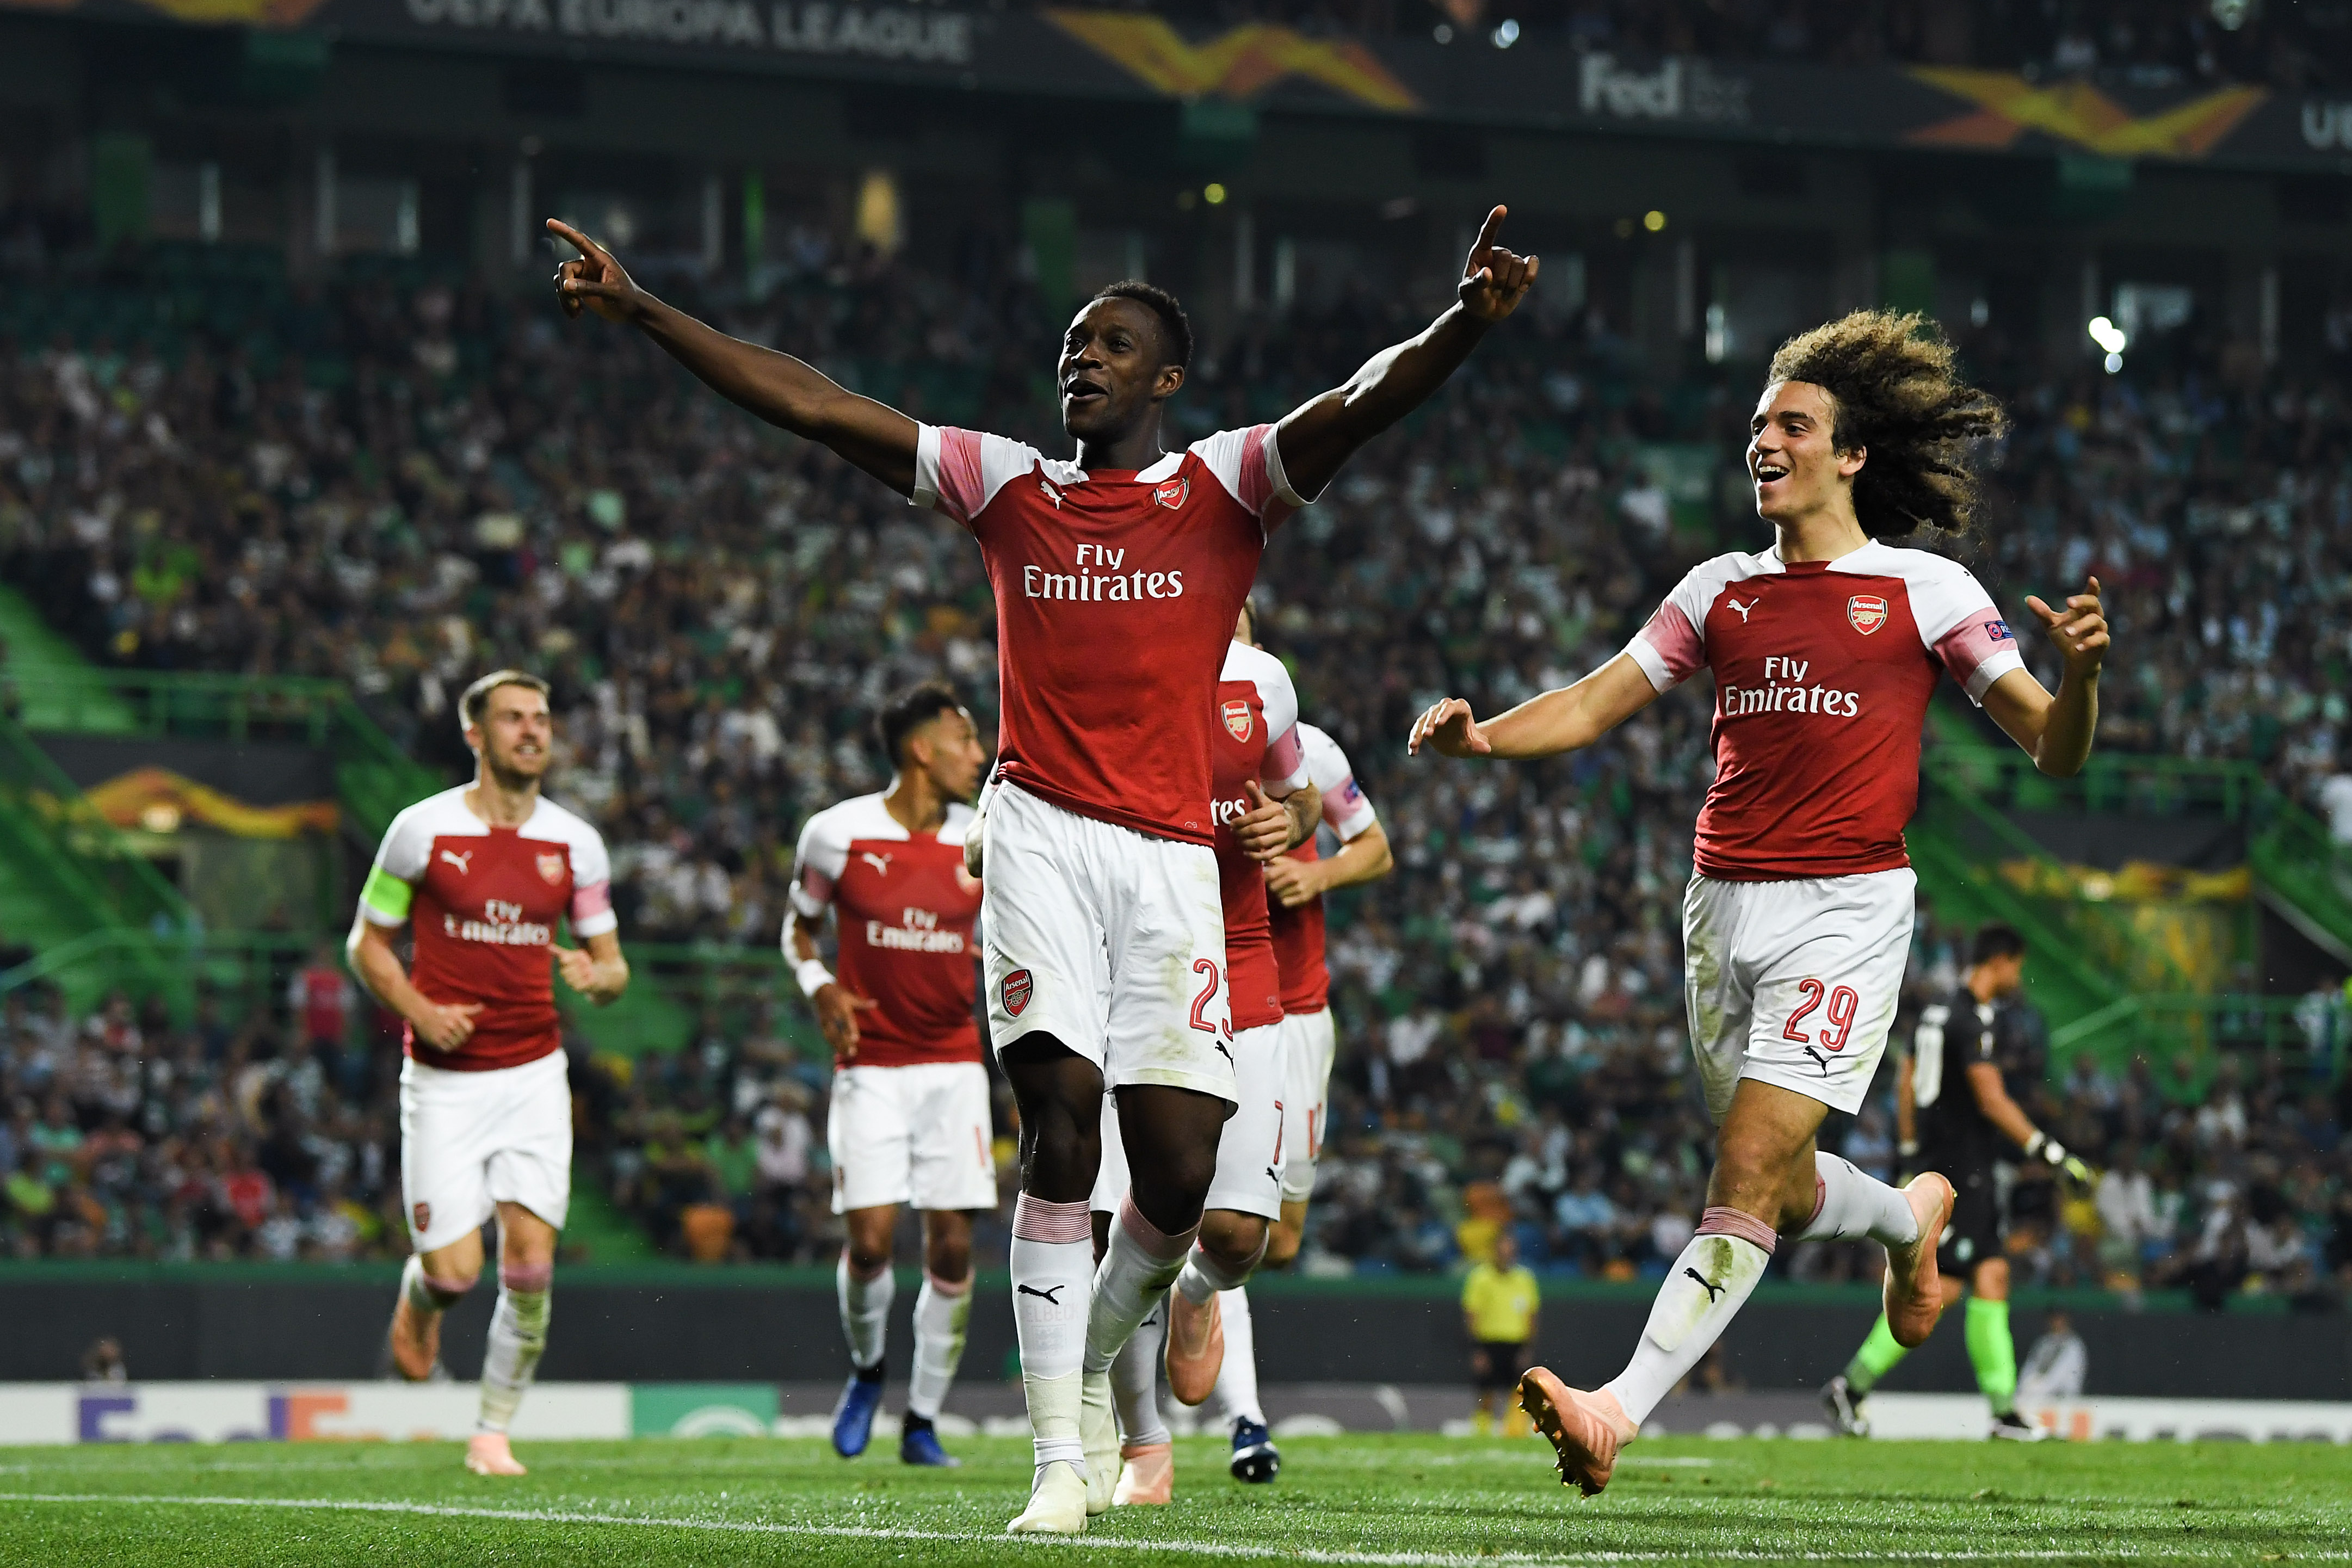 LISBON, PORTUGAL - OCTOBER 25:  Danny Welbeck of Arsenal celebrates with Matteo Guendouzi of Arsenal after scoring his sides first goal during the UEFA Europa League Group E match between Sporting CP and Arsenal at Estadio Jose Alvalade on October 25, 2018 in Lisbon, Portugal.  (Photo by David Ramos/Getty Images)